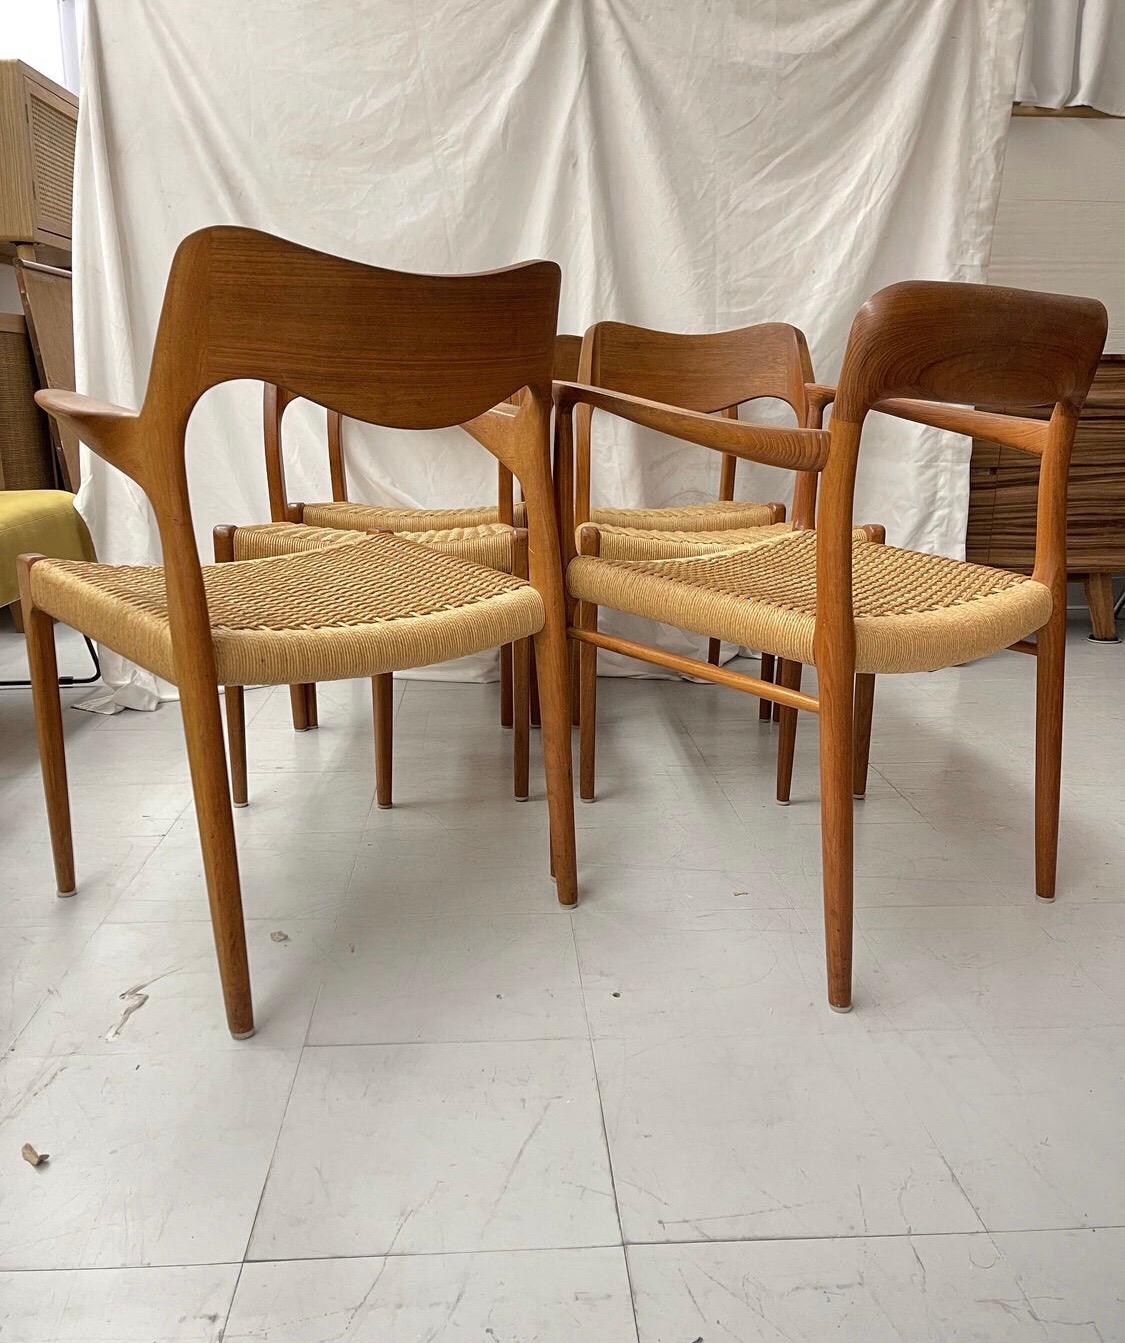 Teak 1960s Danish Modern Jl Moller Chairs with Caning, Set of 6